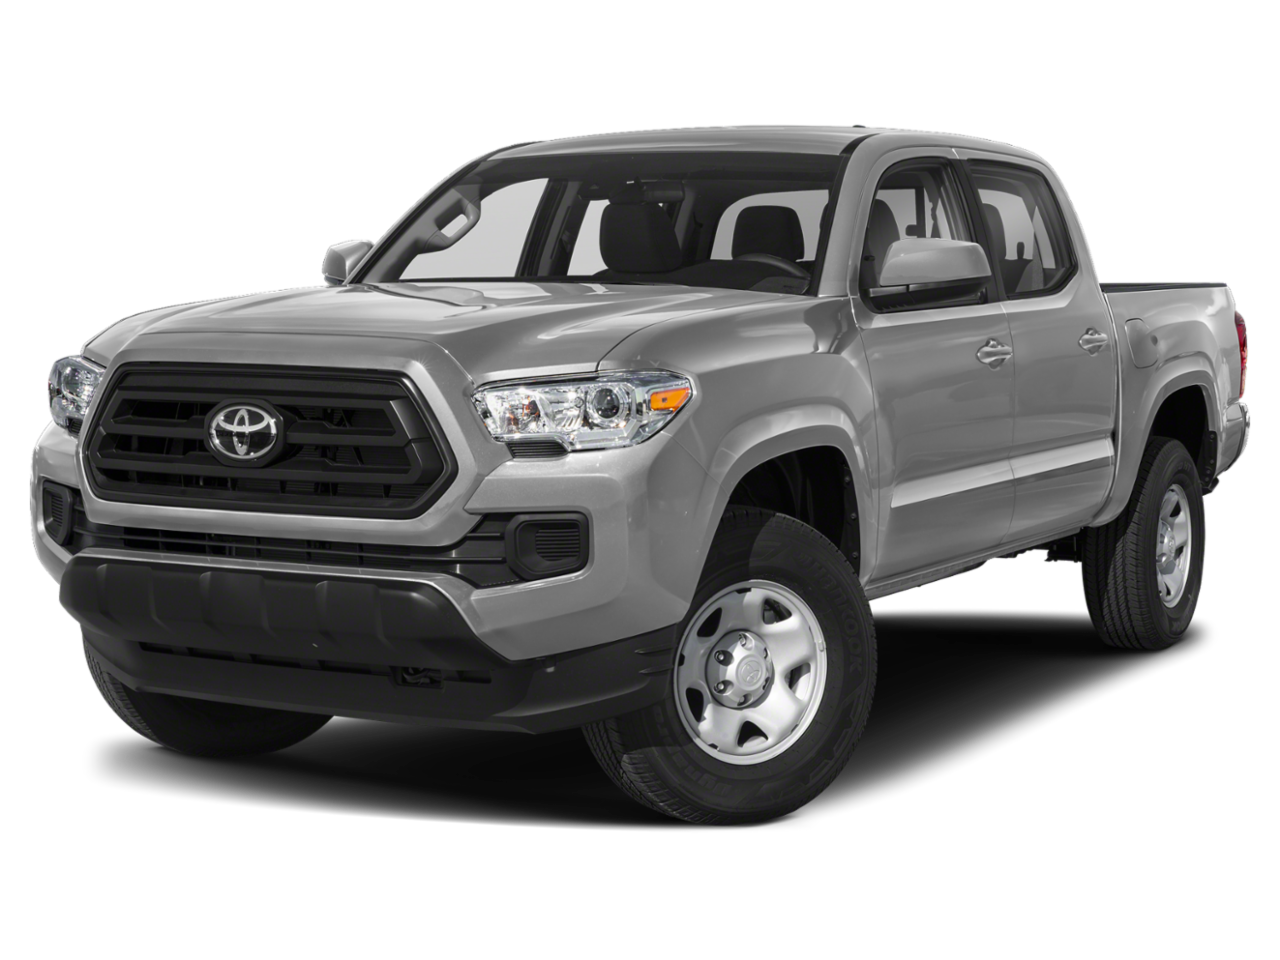 New Toyota 4WD from your St Peters, MO dealership, Johnny